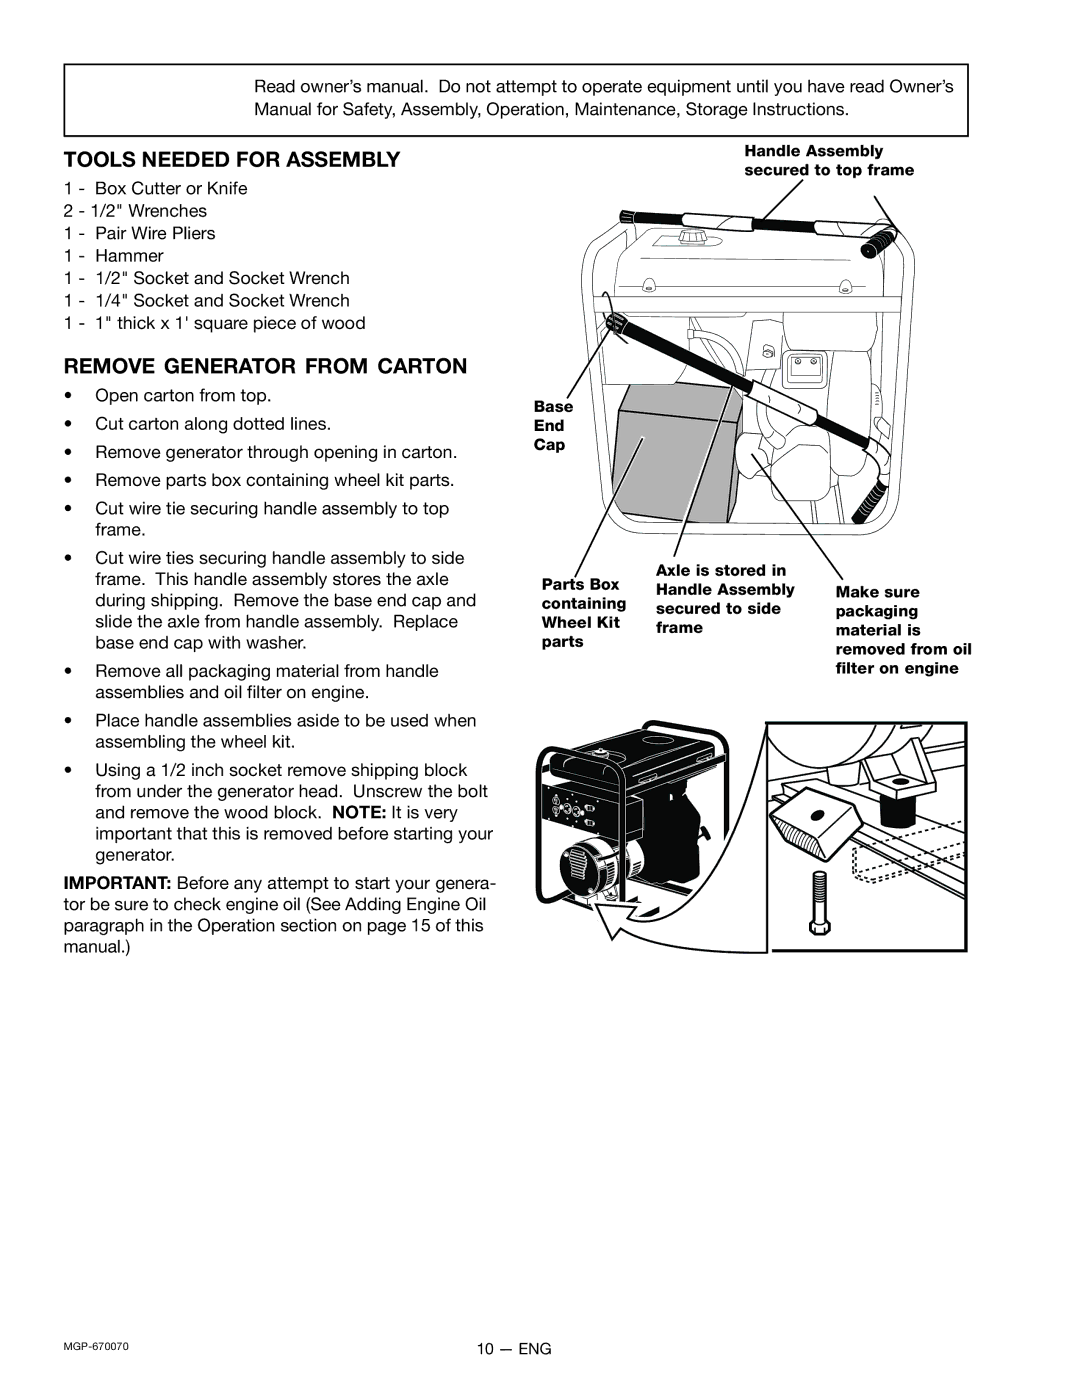 Craftsman MGP-670070, 919.670070 owner manual Tools Needed for Assembly, Remove Generator from Carton 